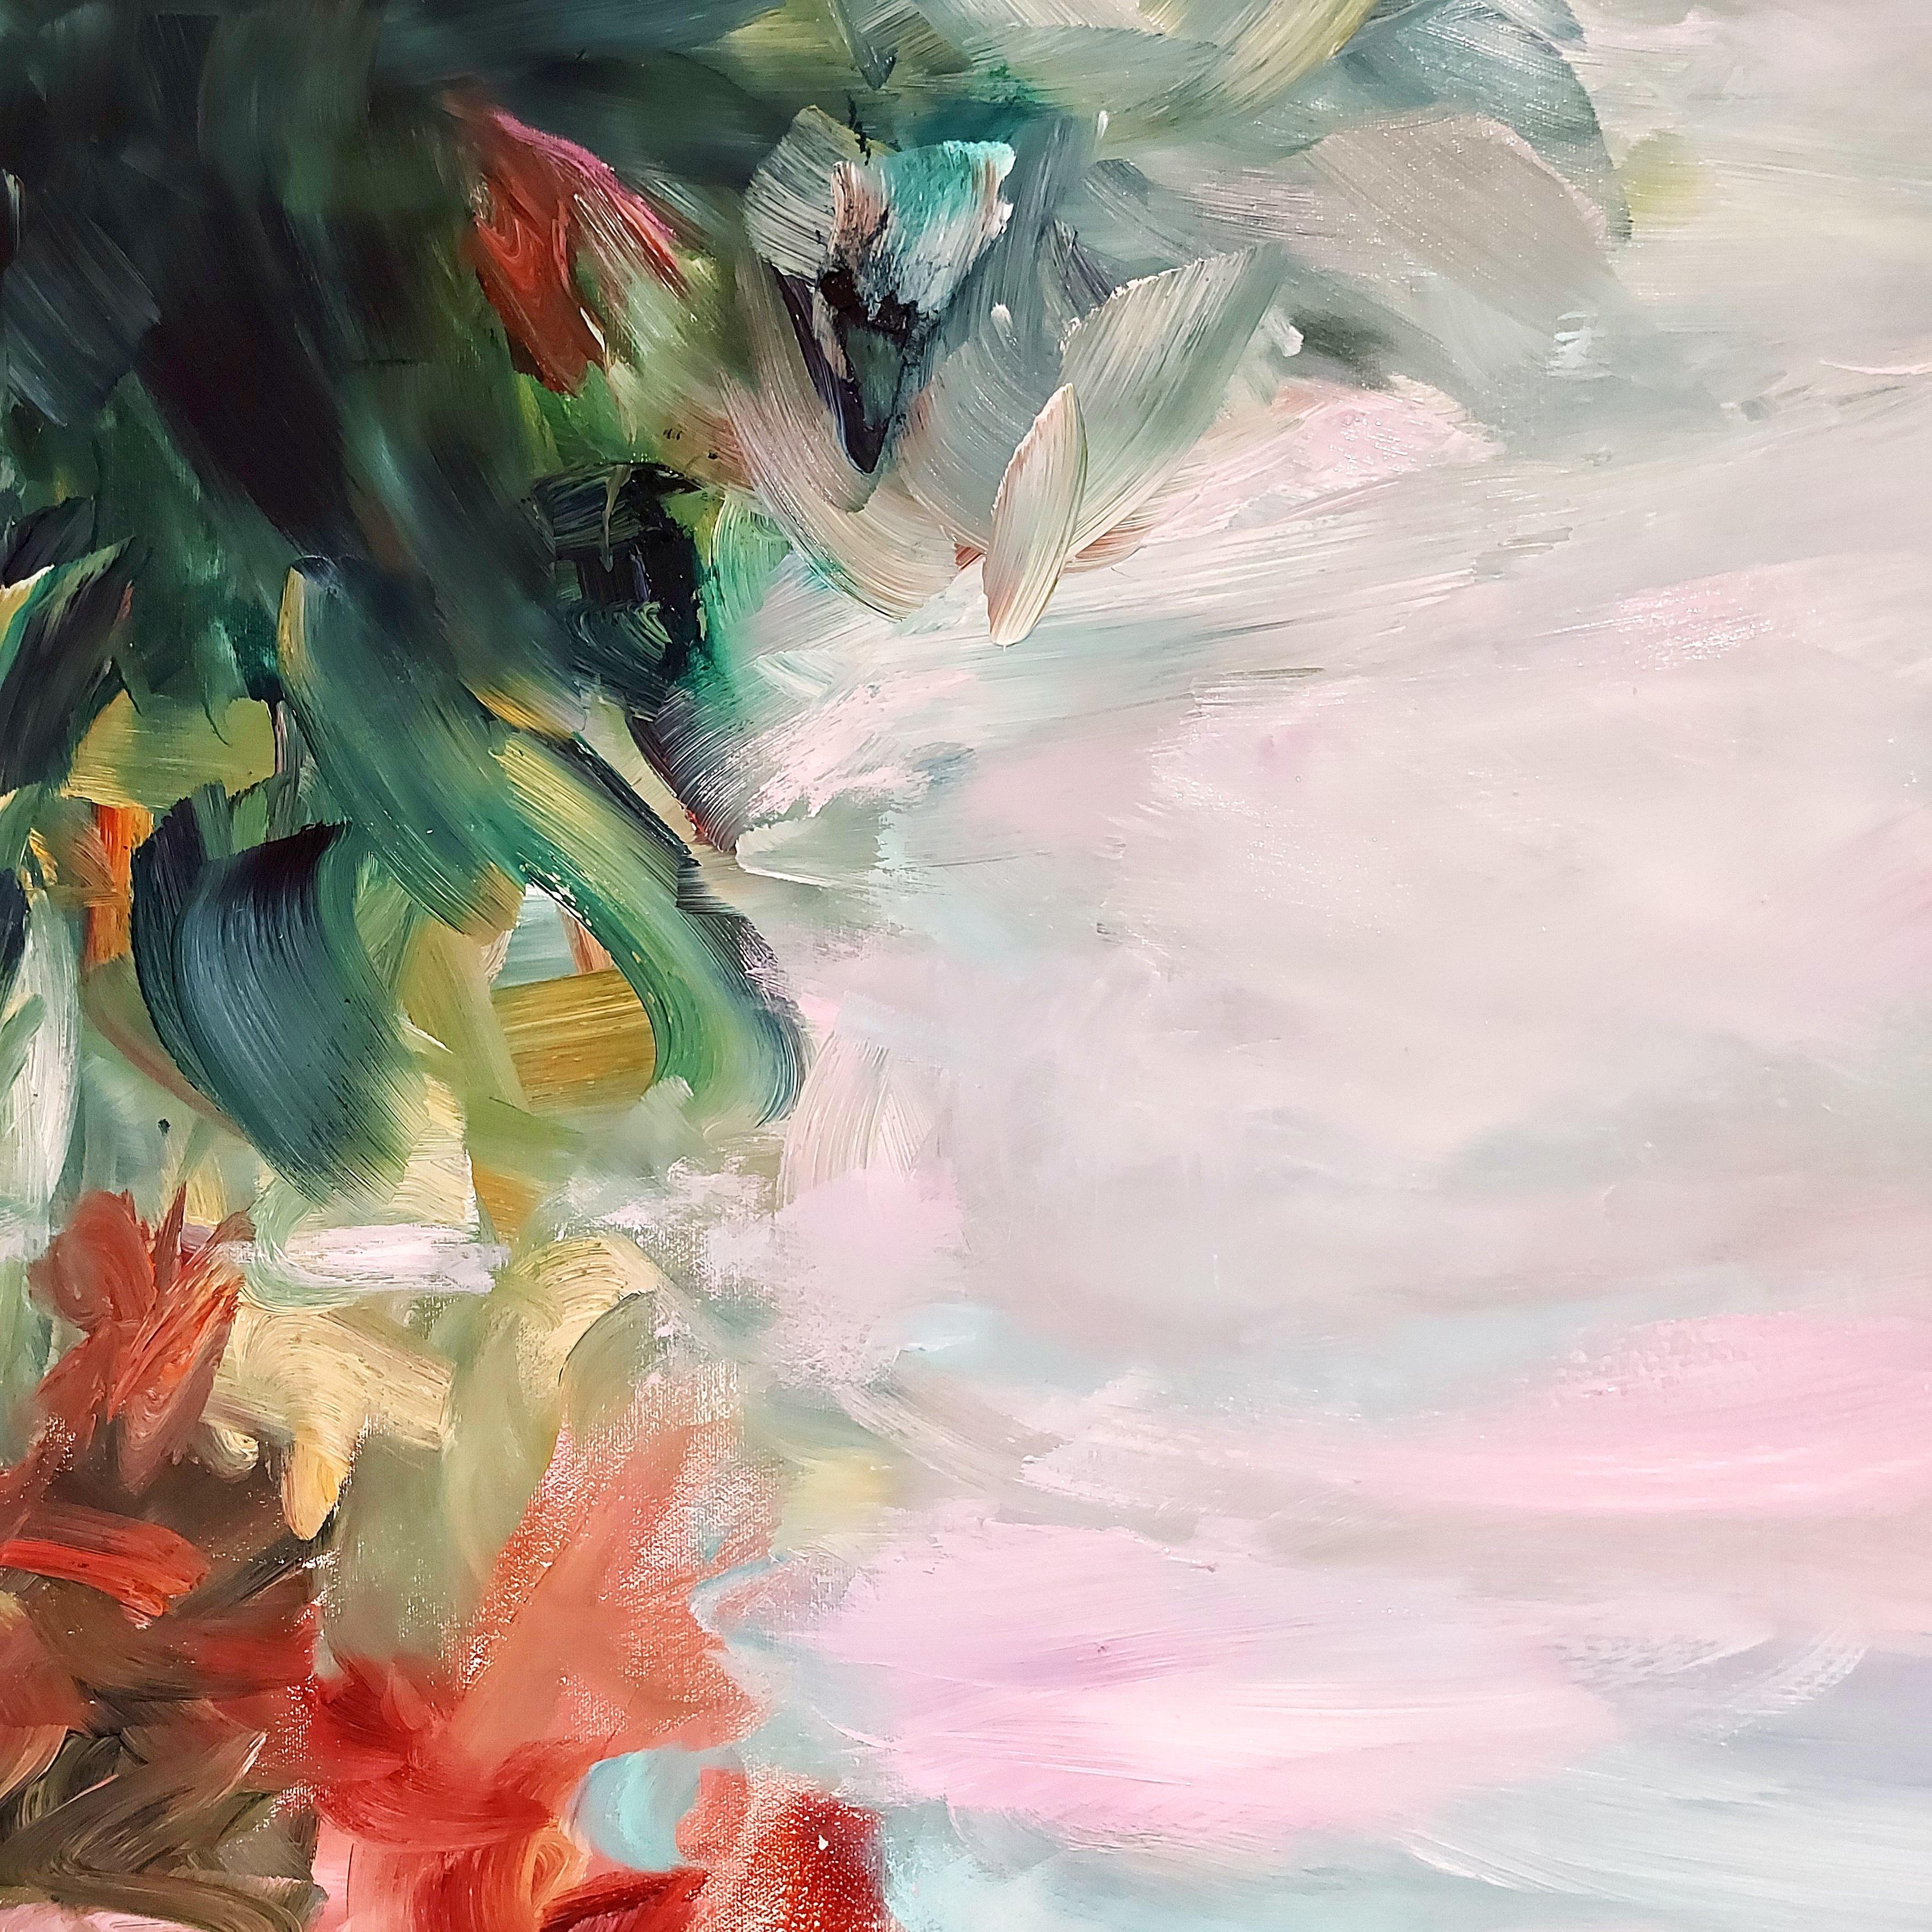 When we look at reflections in ponds from the sky we can imagine those we love sending us love from above. It's a comforting feeling as we see sparkling replies to our hopeful thoughts. :: Painting :: Impressionist :: This piece comes with an